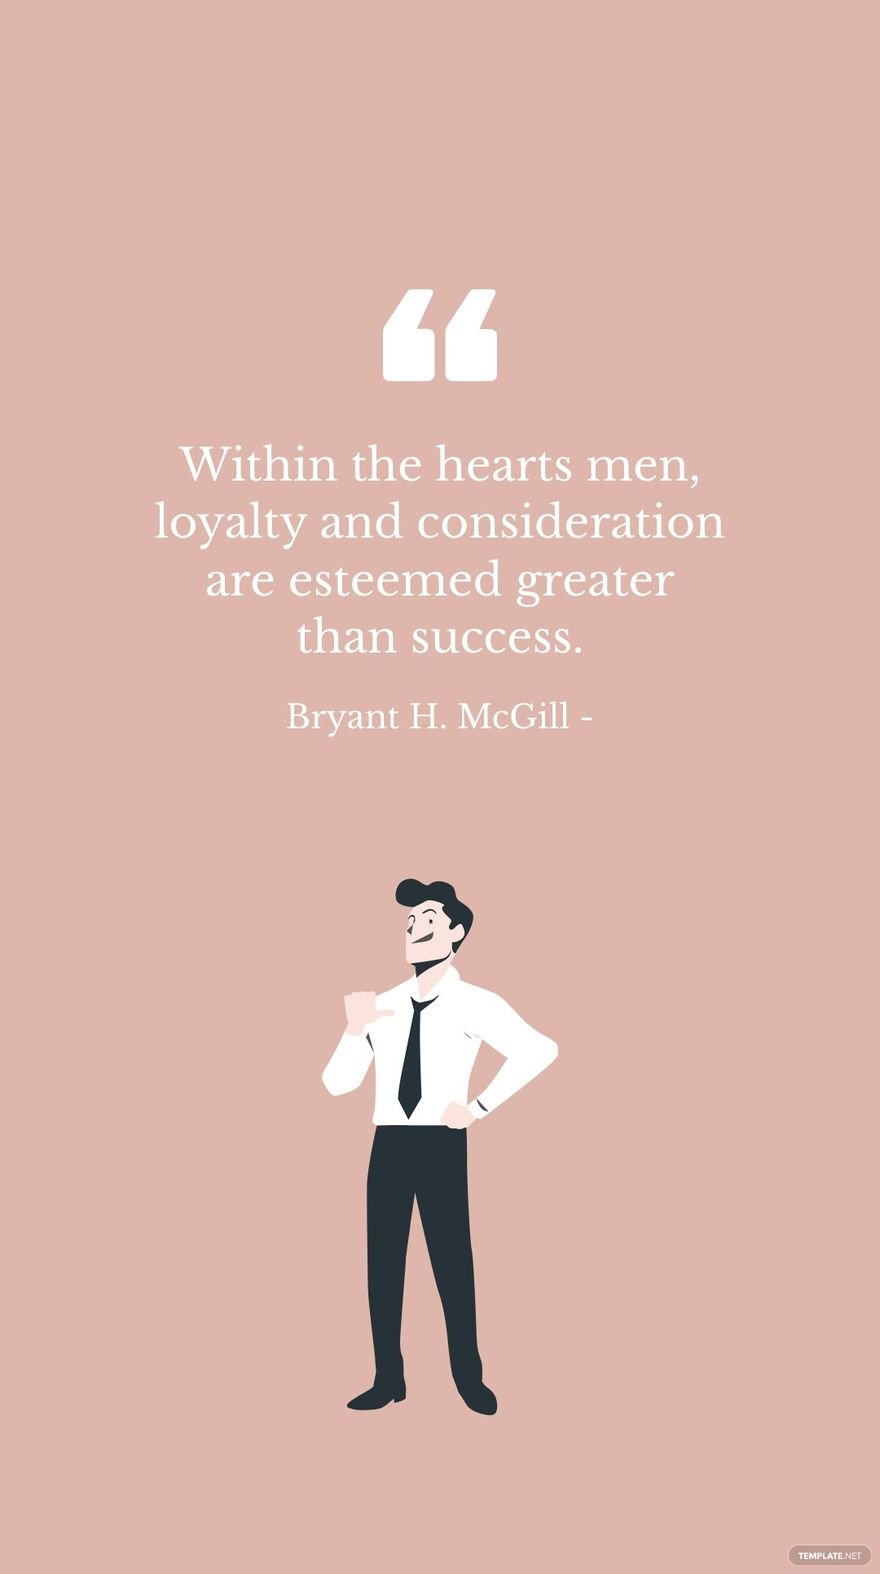 Bryant H. McGill - Within the hearts men, loyalty and consideration are esteemed greater than success. in JPG